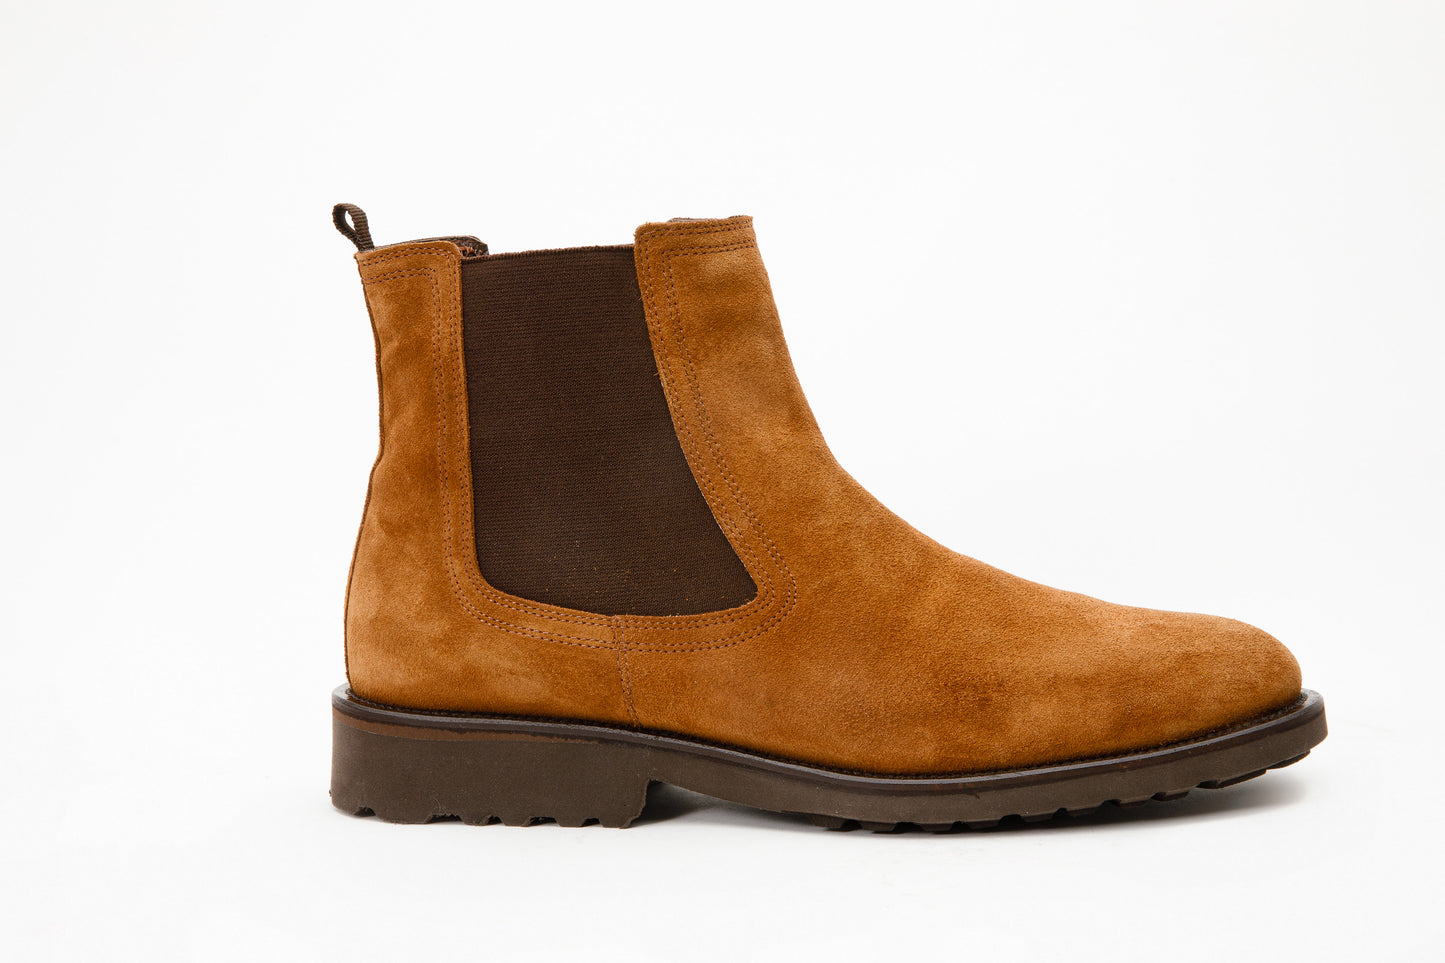 The Nayrobi Tan Suede Leather Chelsea Casual Men Boot  Final Sale!